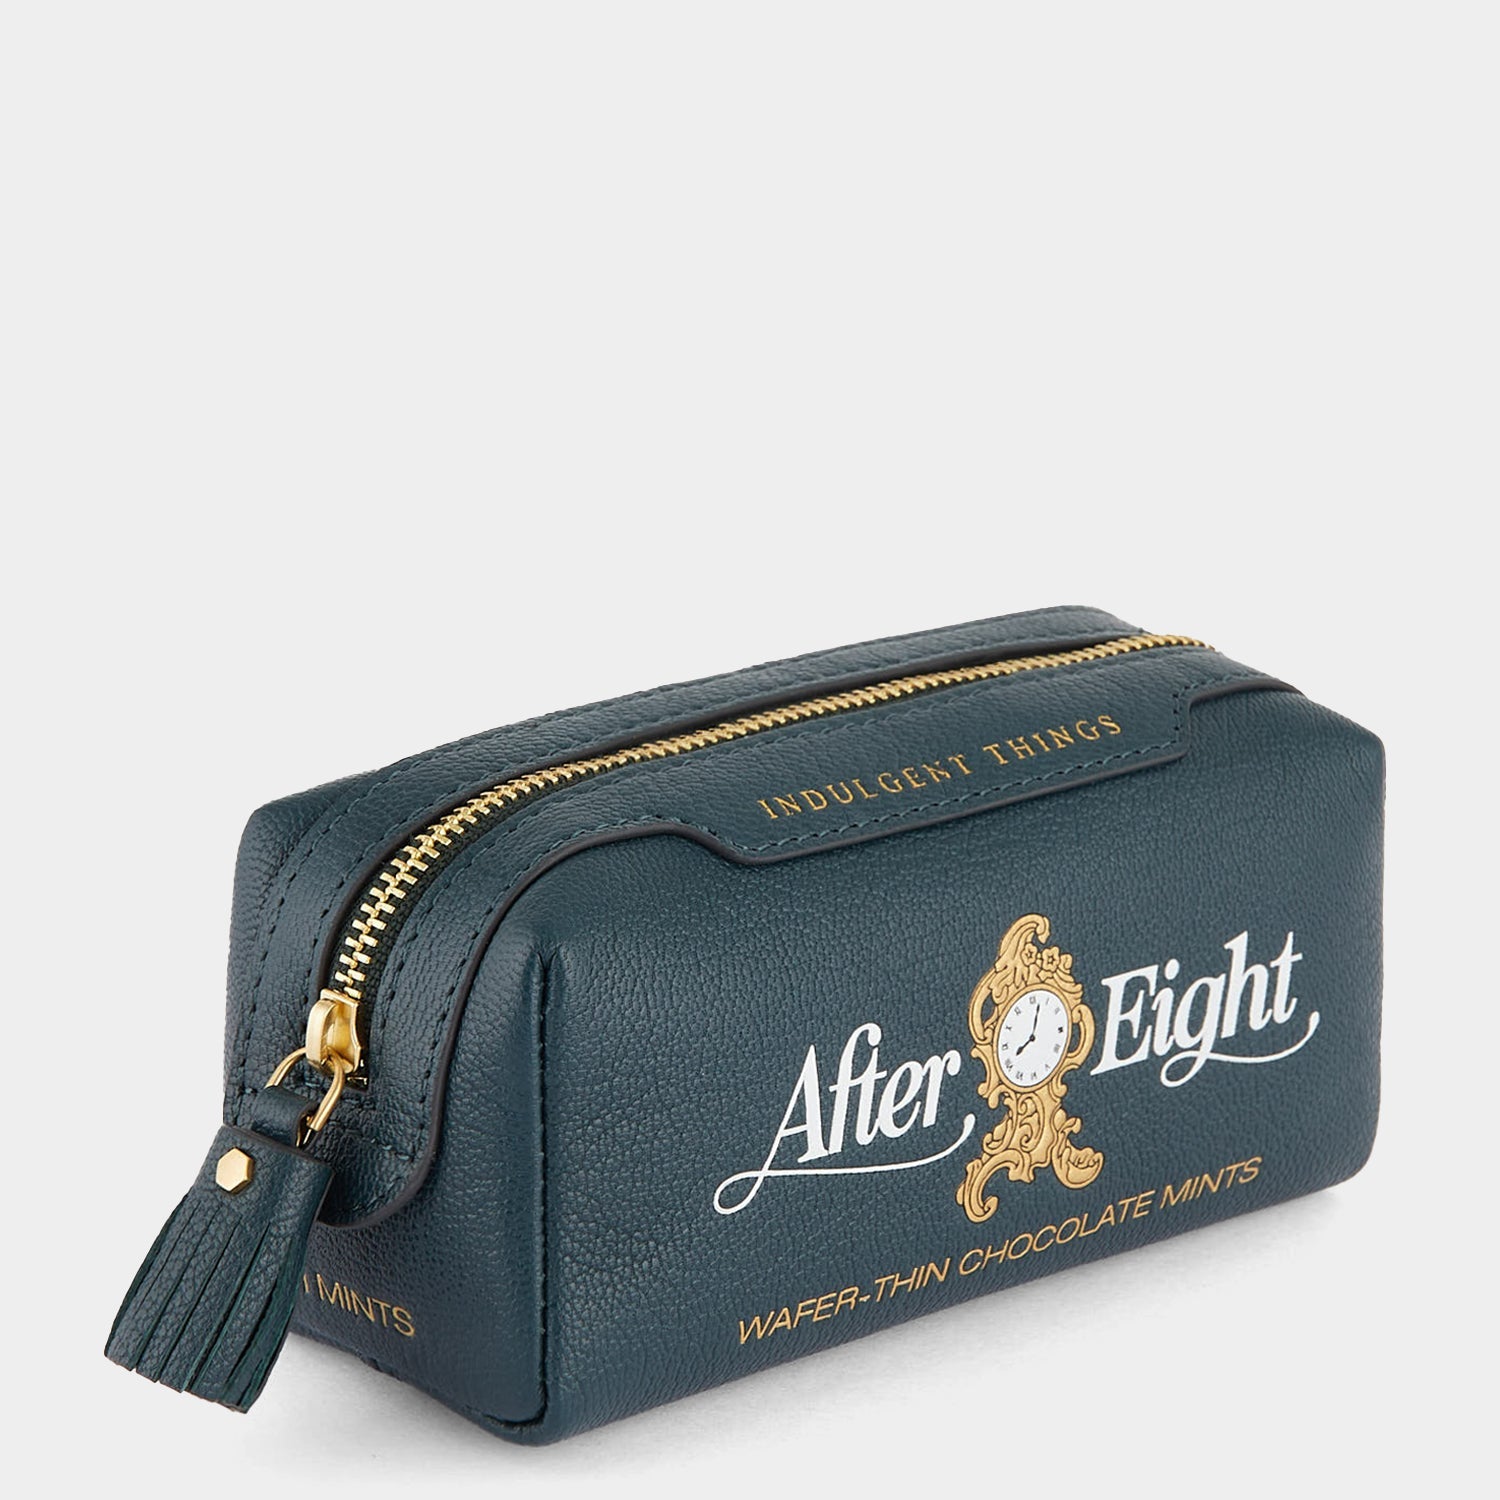 Anya Brands After Eight Indulgent Things